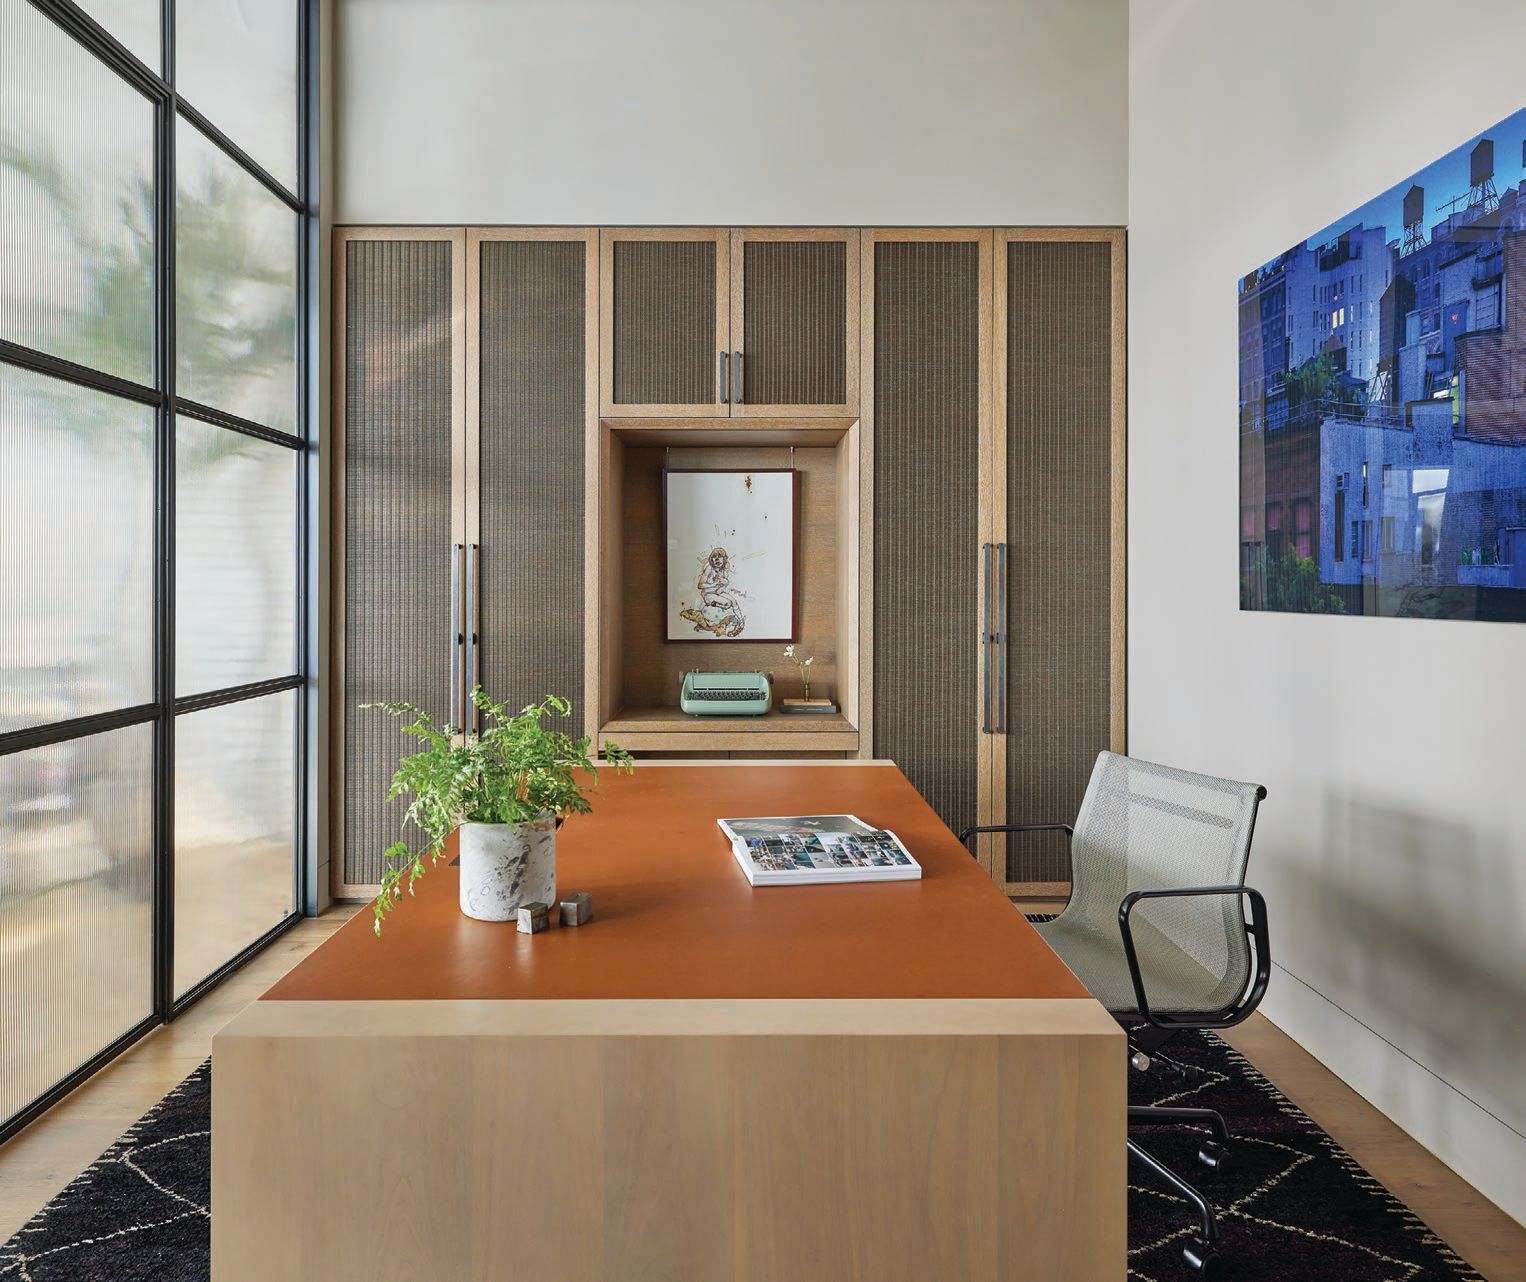 In the office, a custom desk with Edelman leather writing surface by Lagomorph Design   PHOTOGRAPHED BY MIKE SCHWARTZ